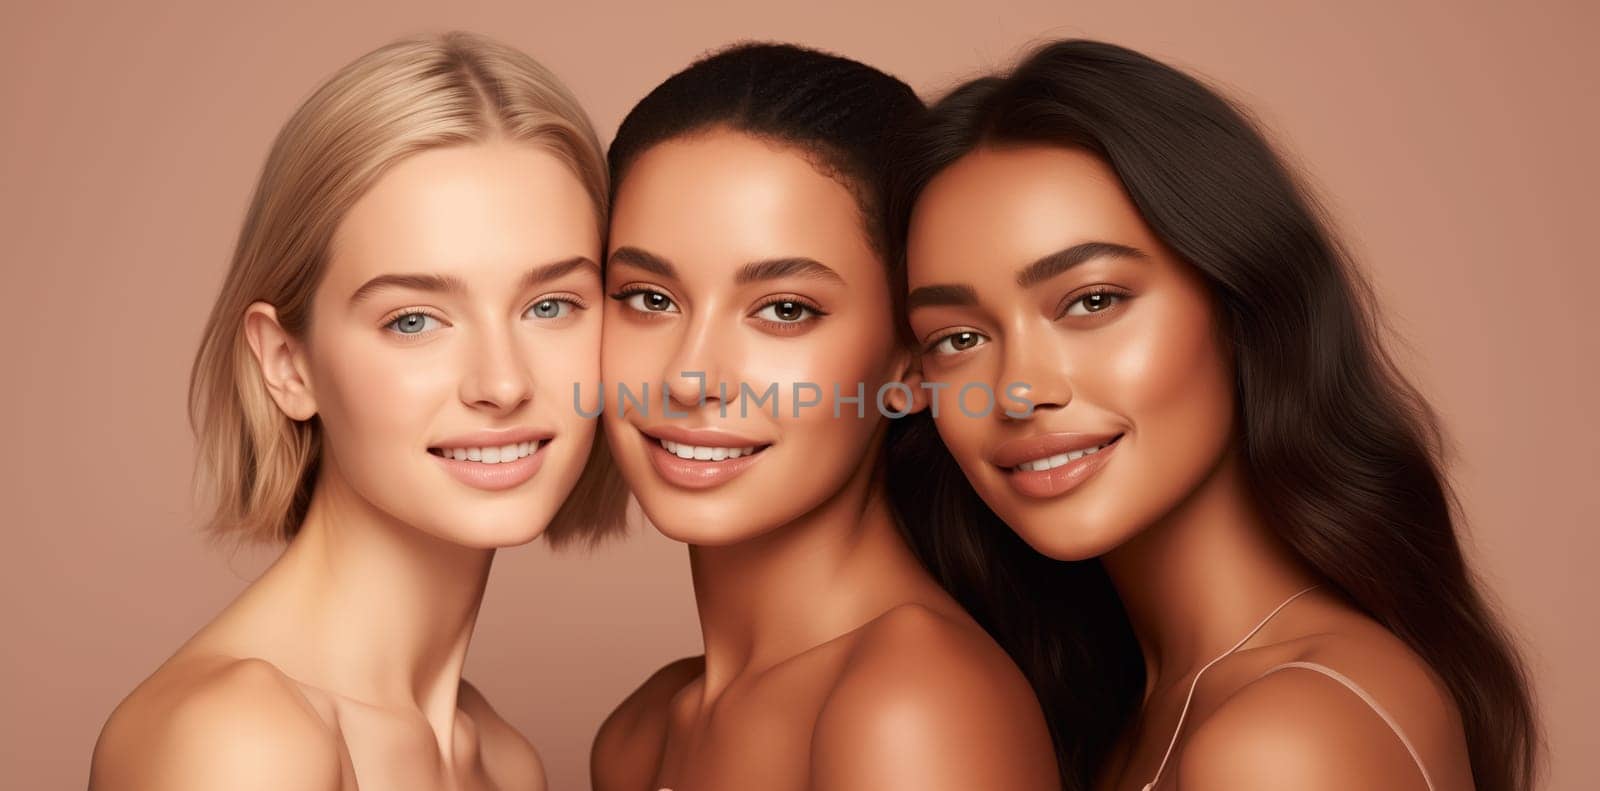 Beauty portrait of three diverse young women with clean skin, beautiful female models together by Rohappy